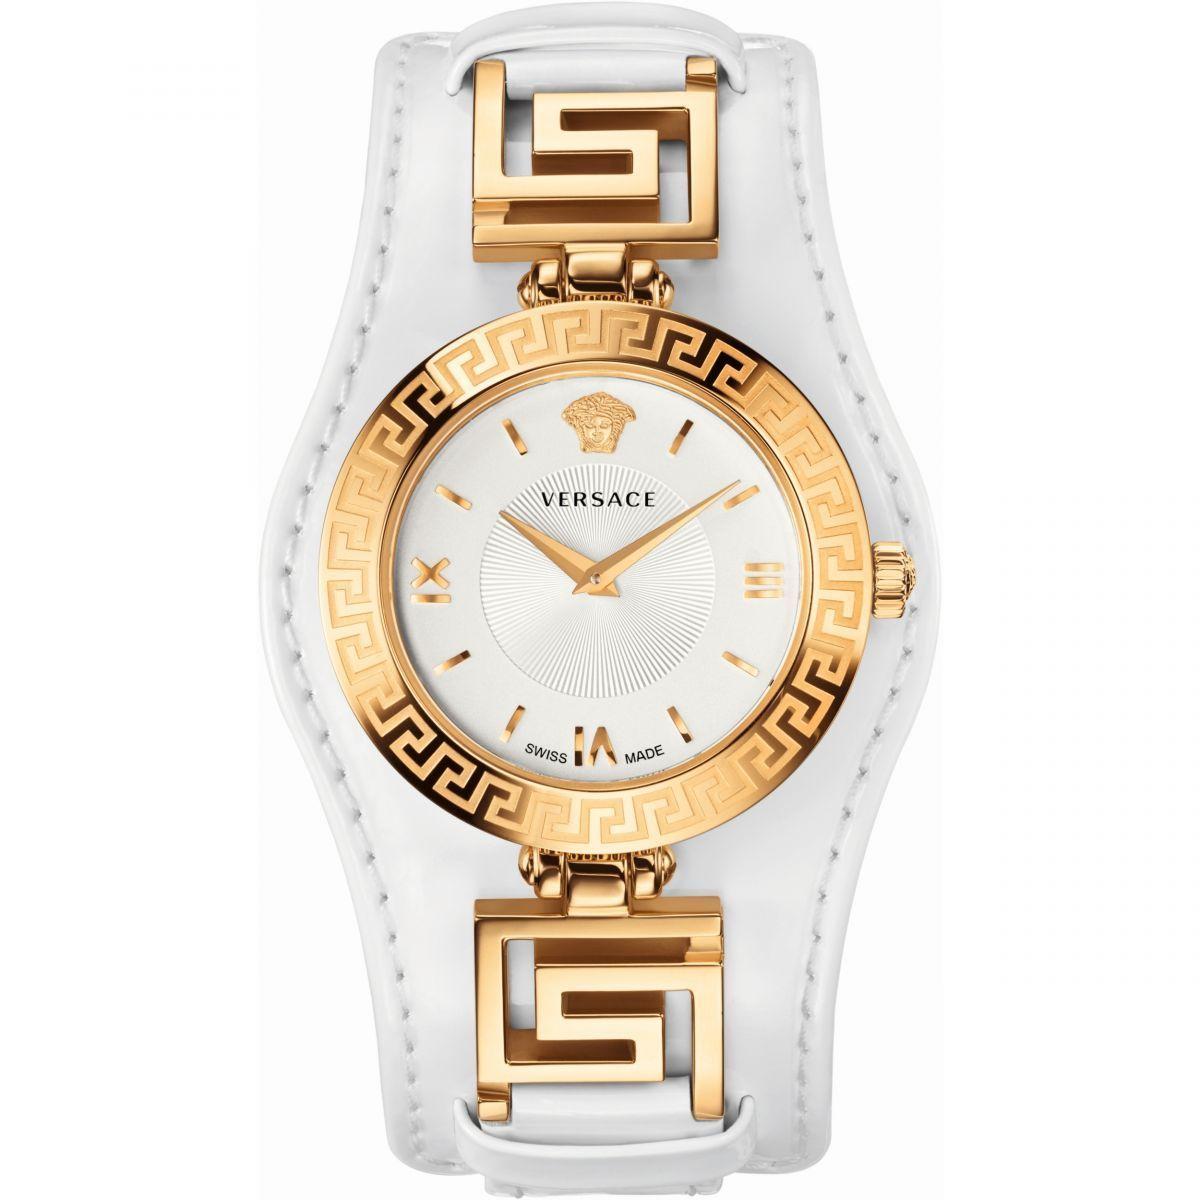 Modern Authentic New Versace V-Signature Gold-Plated Quartz Watch